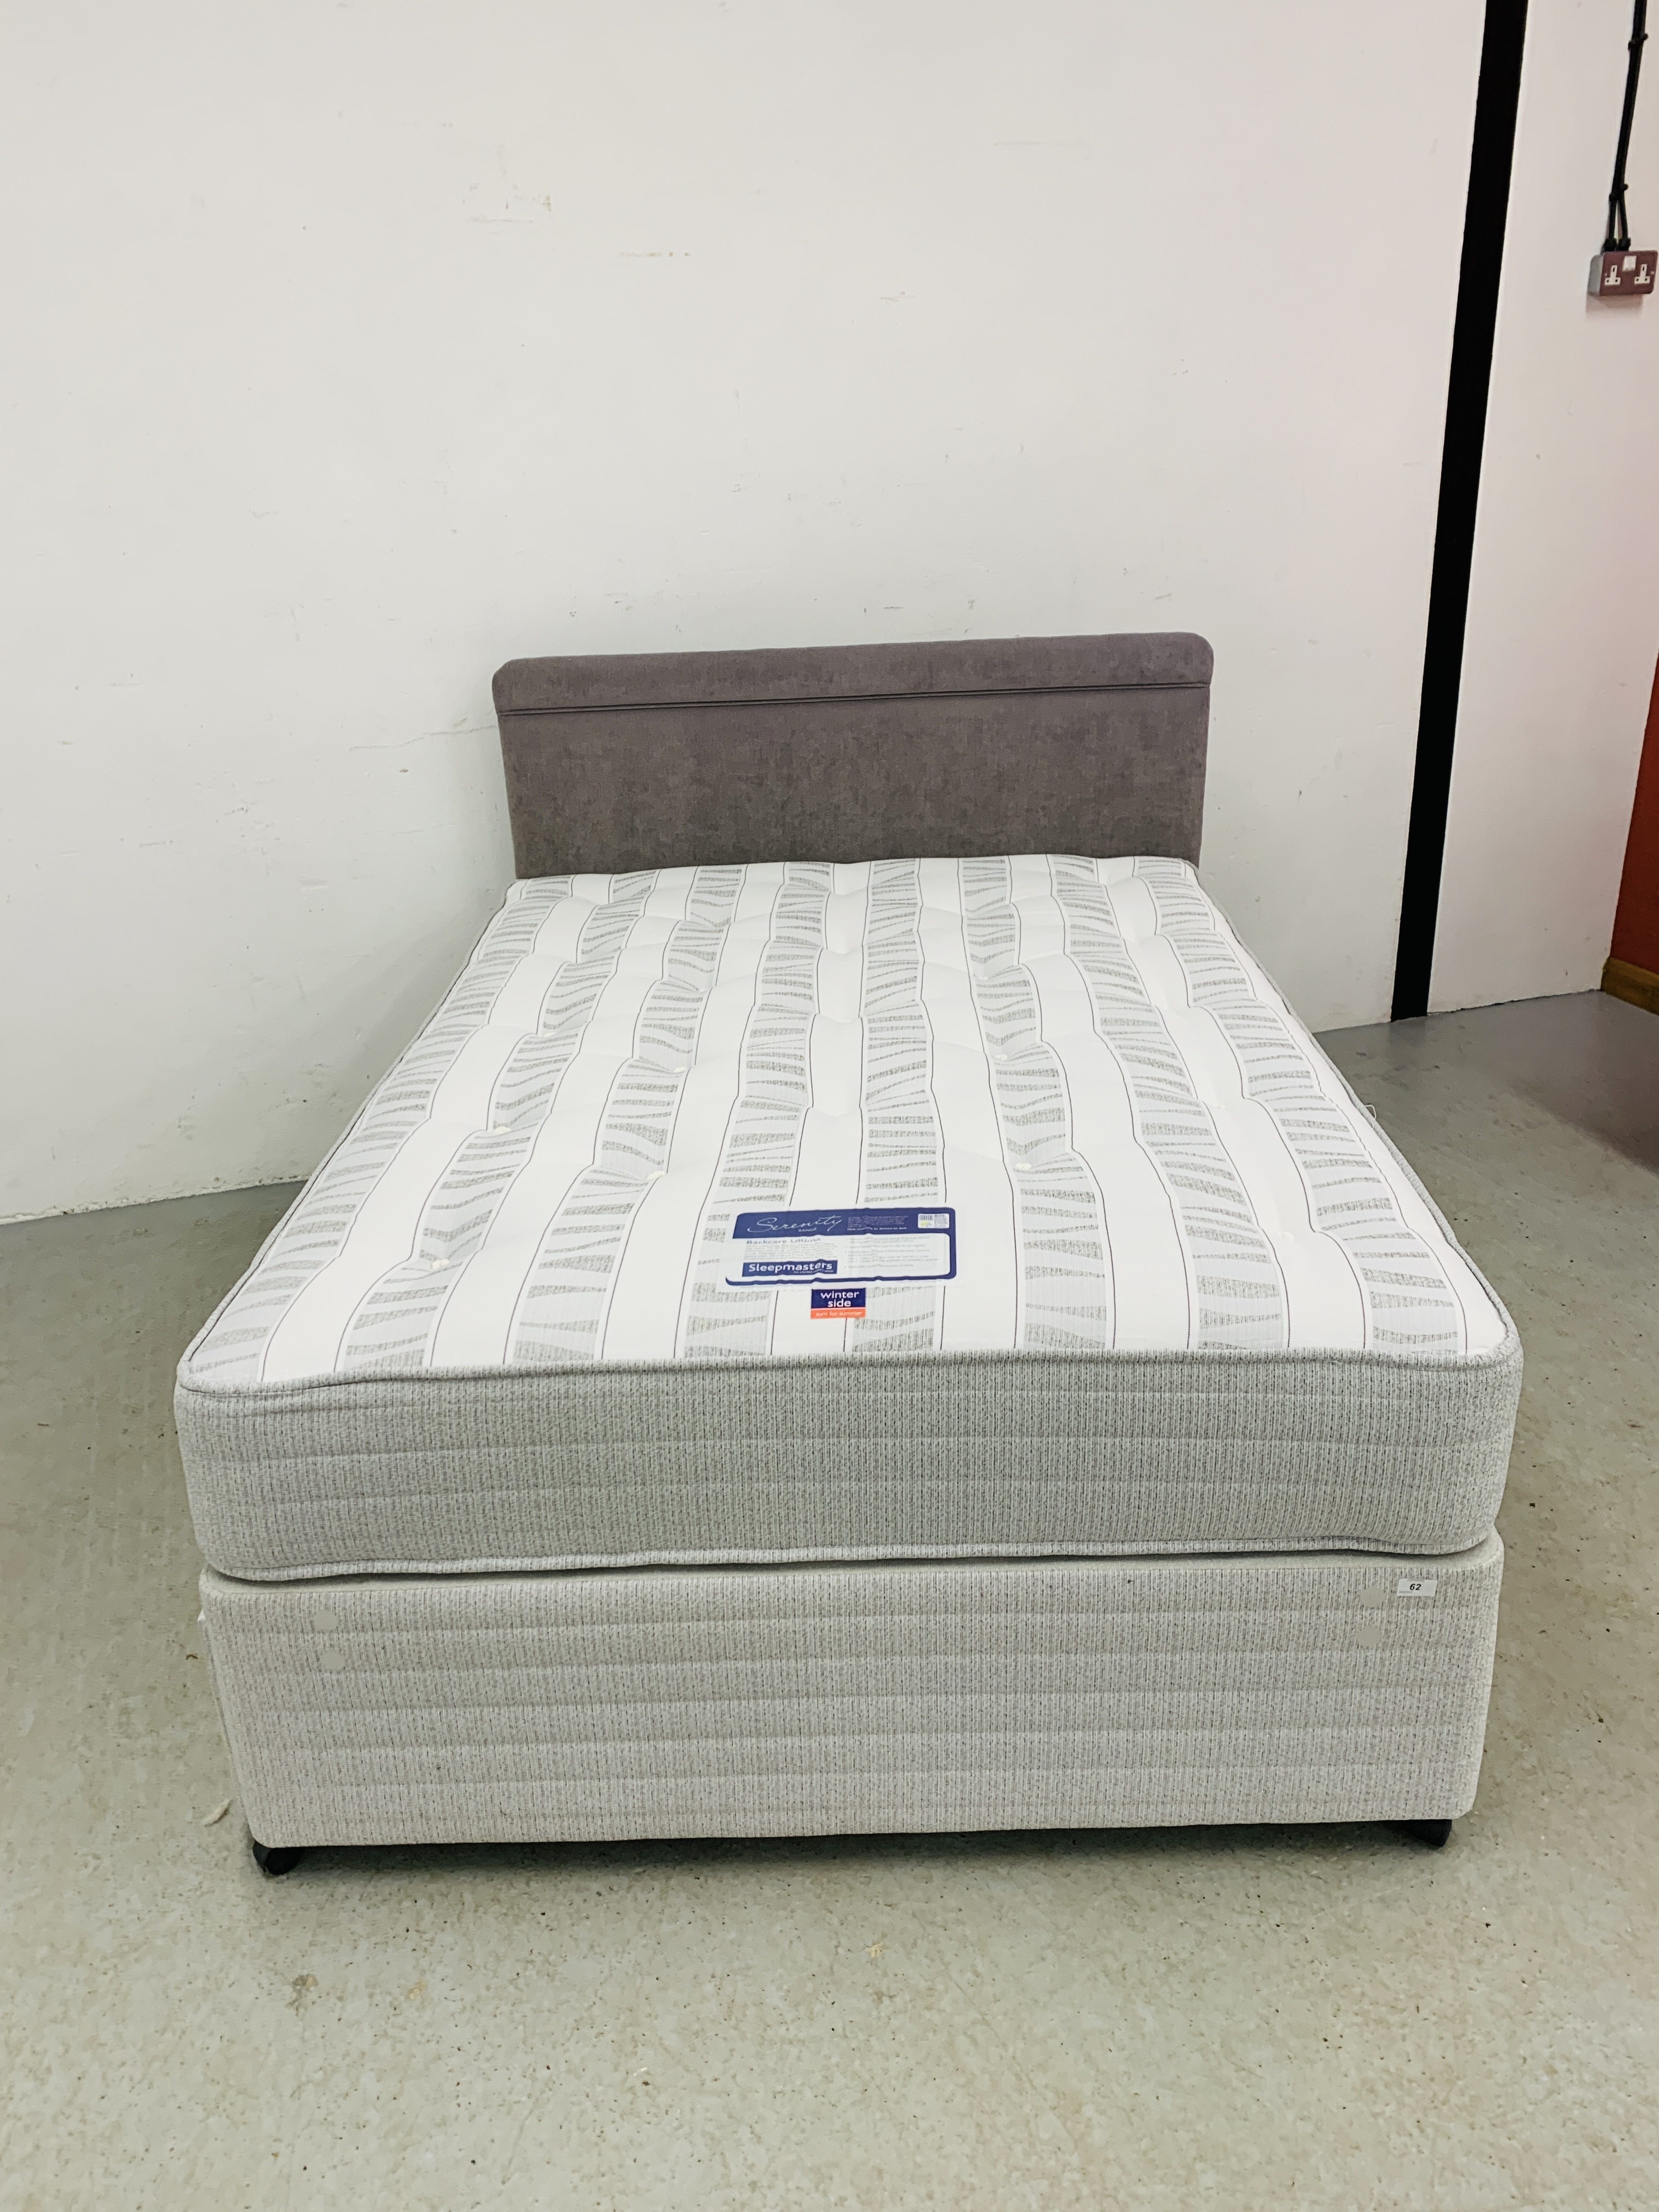 A SLEEP MASTER SERENITY RANGE BACKCARE ULTIMA DOUBLE DIVAN BED WITH TWO DRAWER BASE COMPLETE WITH - Image 11 of 13